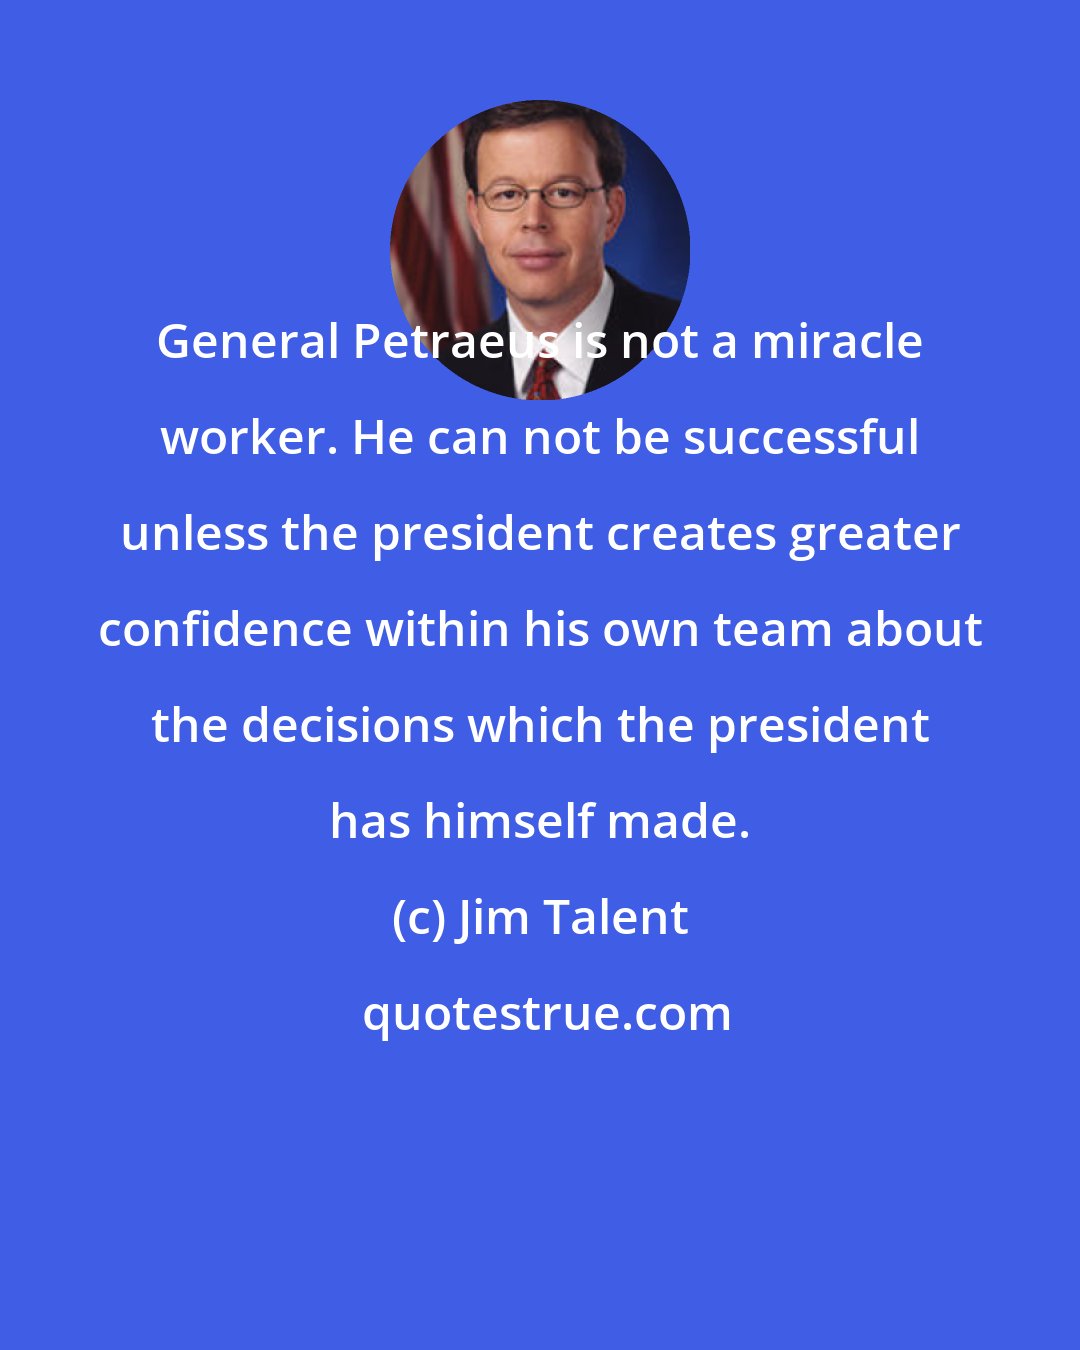 Jim Talent: General Petraeus is not a miracle worker. He can not be successful unless the president creates greater confidence within his own team about the decisions which the president has himself made.